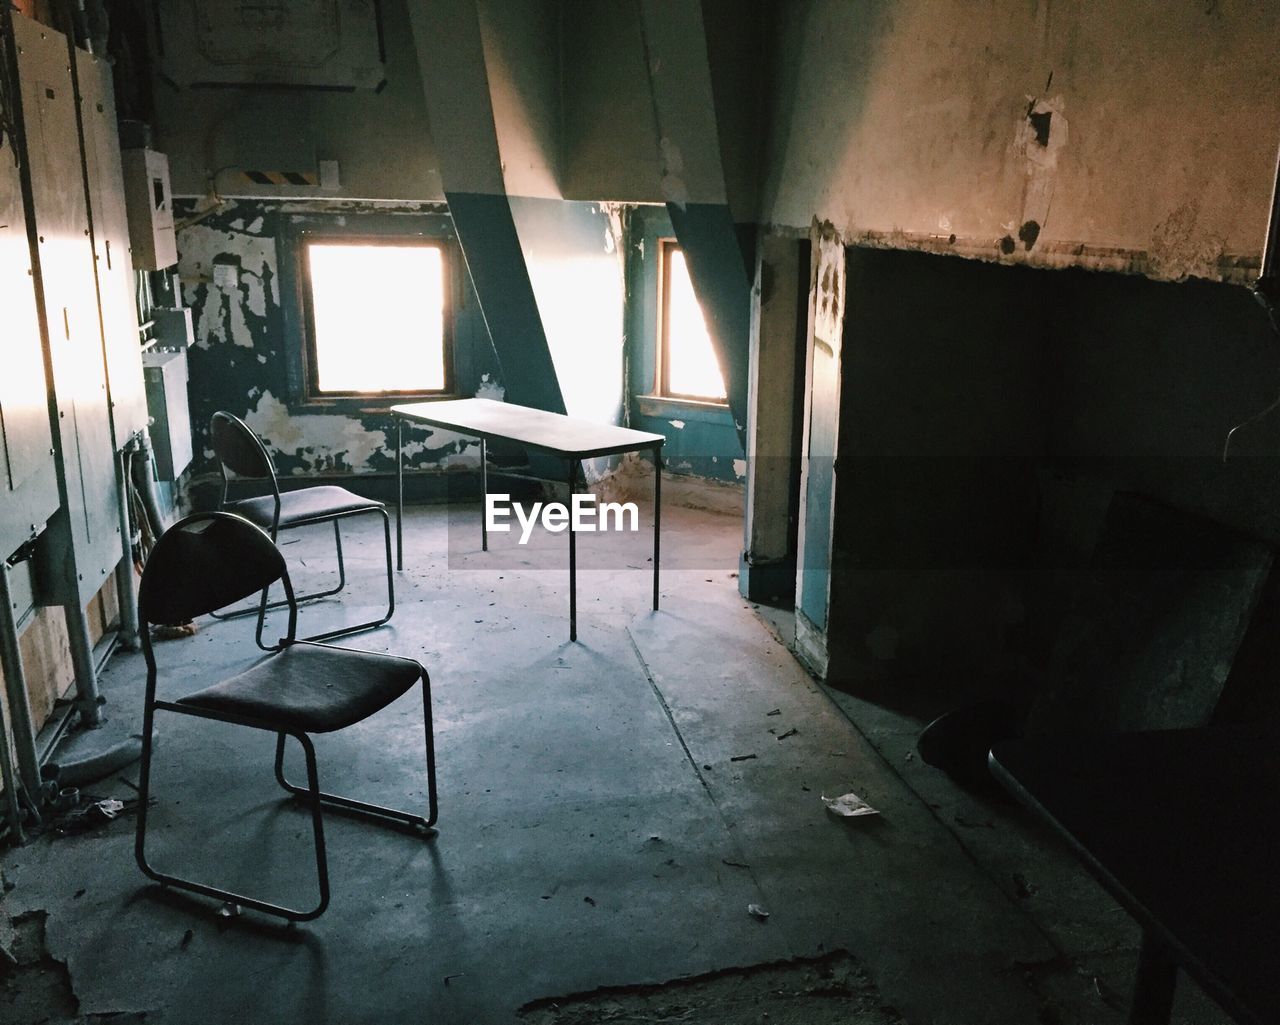 Chairs in an abandoned room with windows